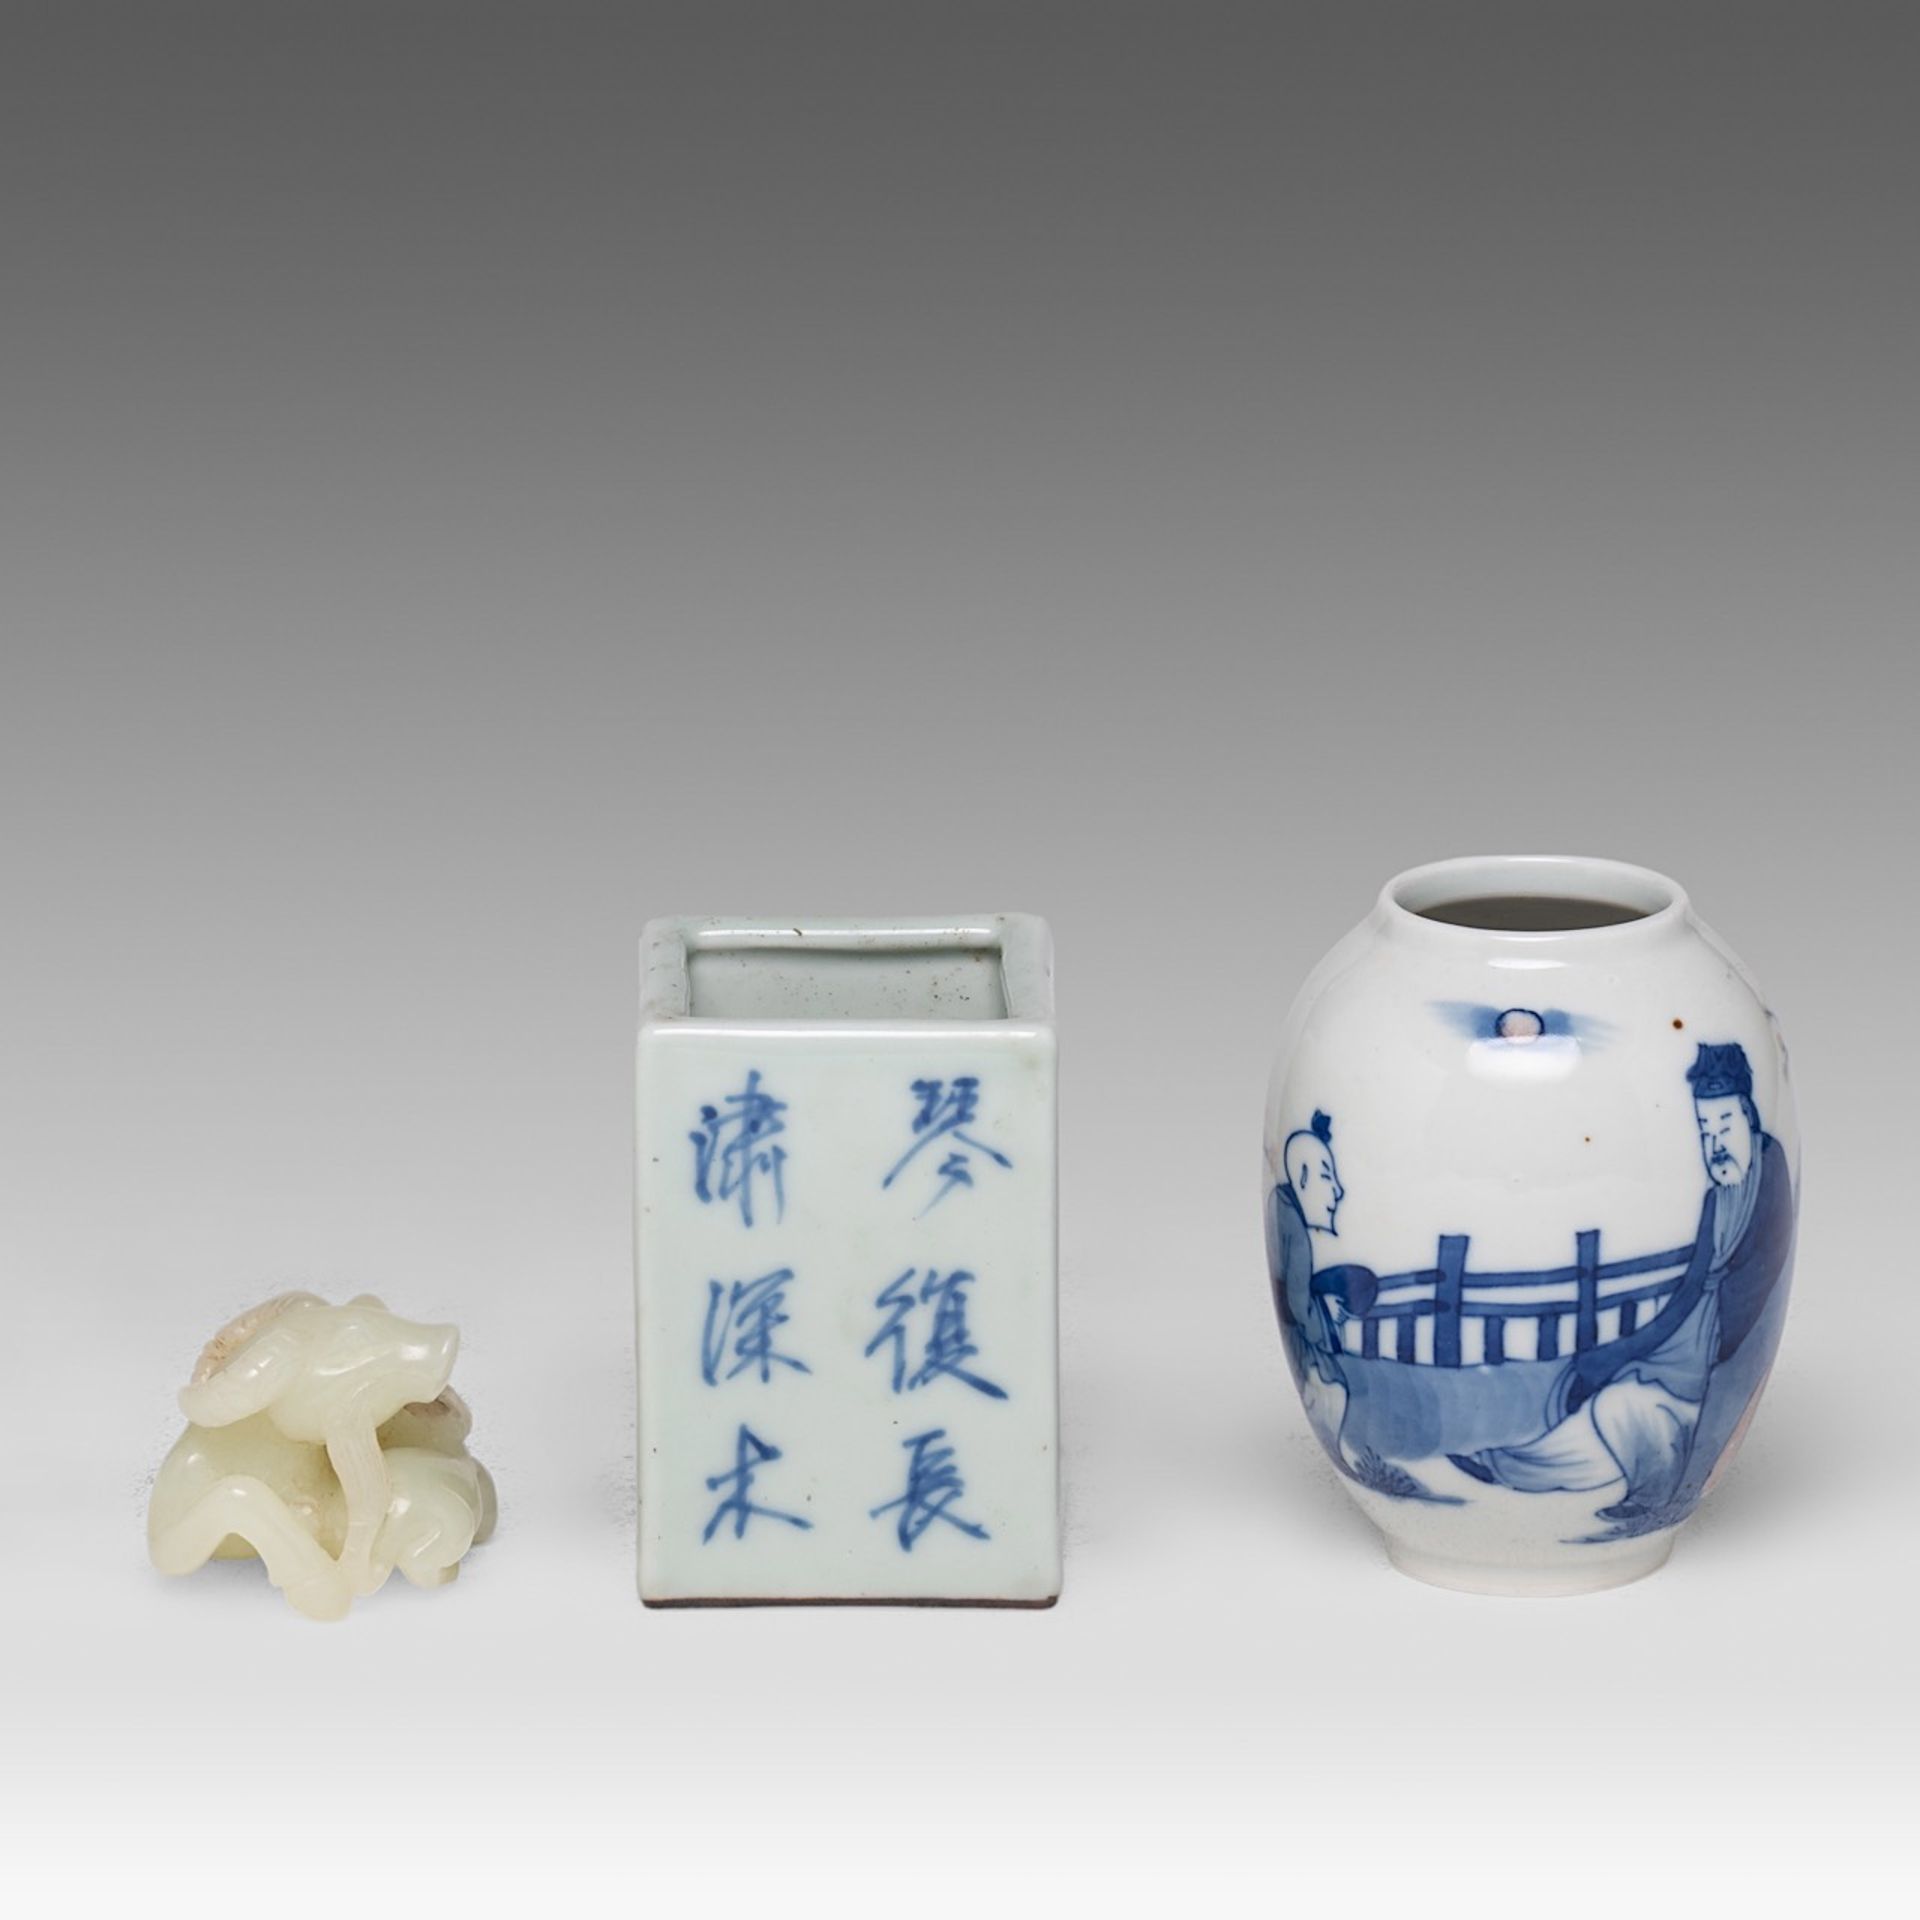 A collection of four Chinese scholar's objects, incl. a brush pot with inscriptions, late 18thC - ad - Bild 5 aus 29